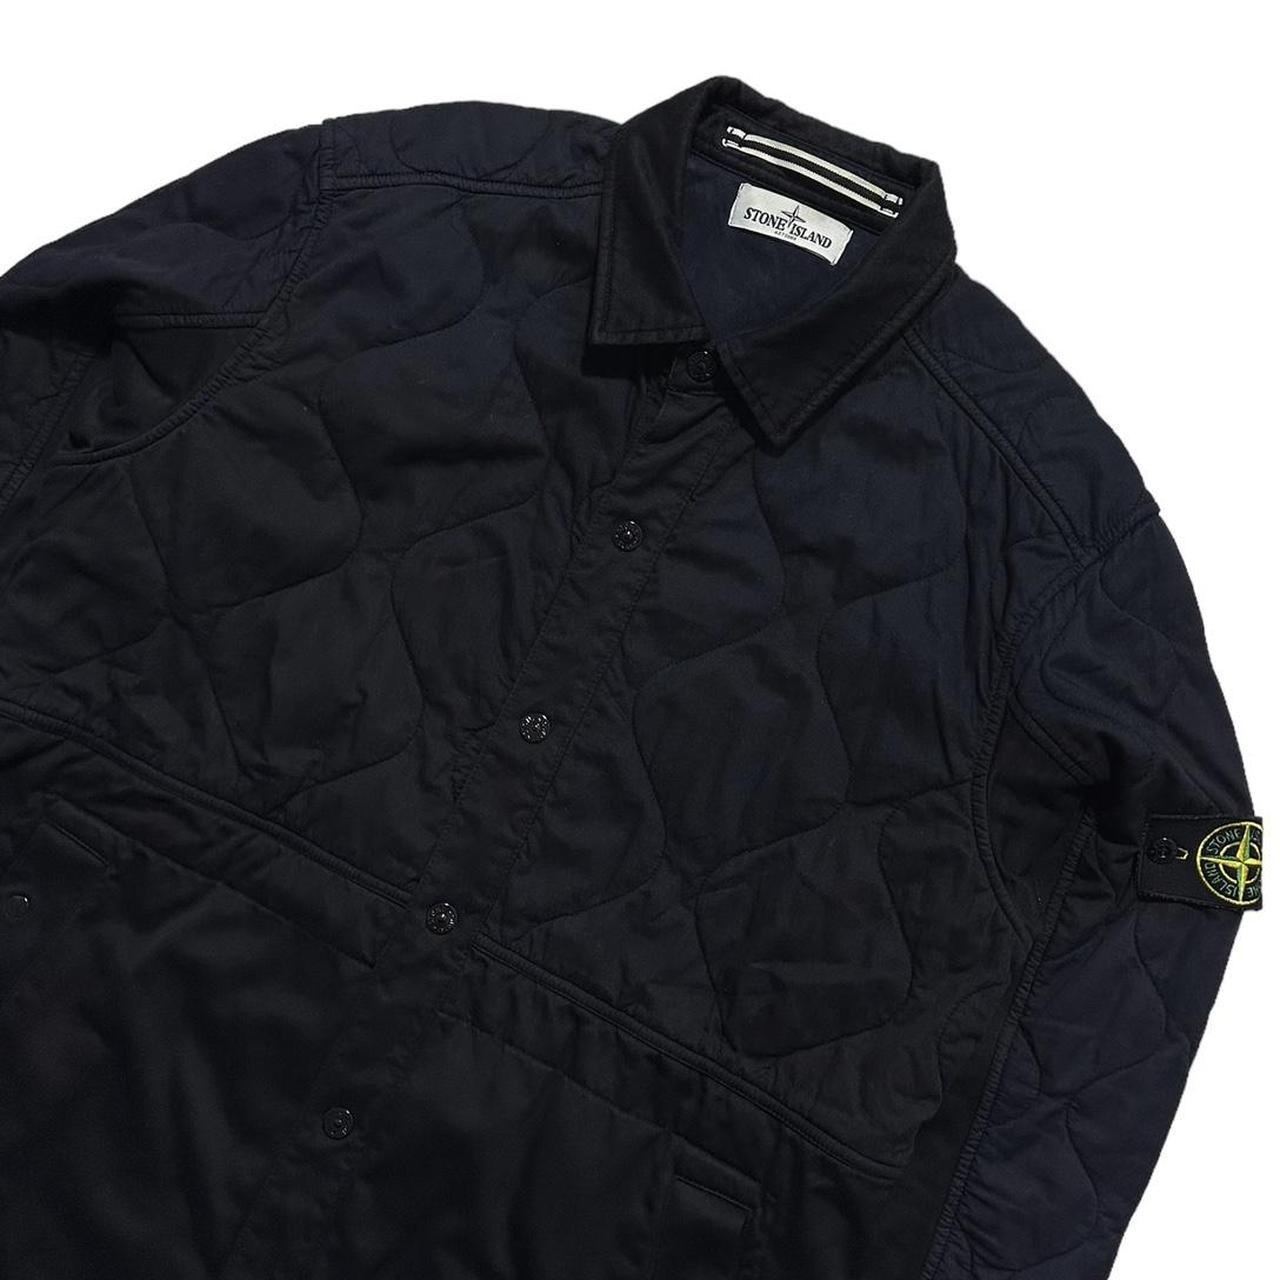 Stone Island Black Quilted Overshirt - Known Source